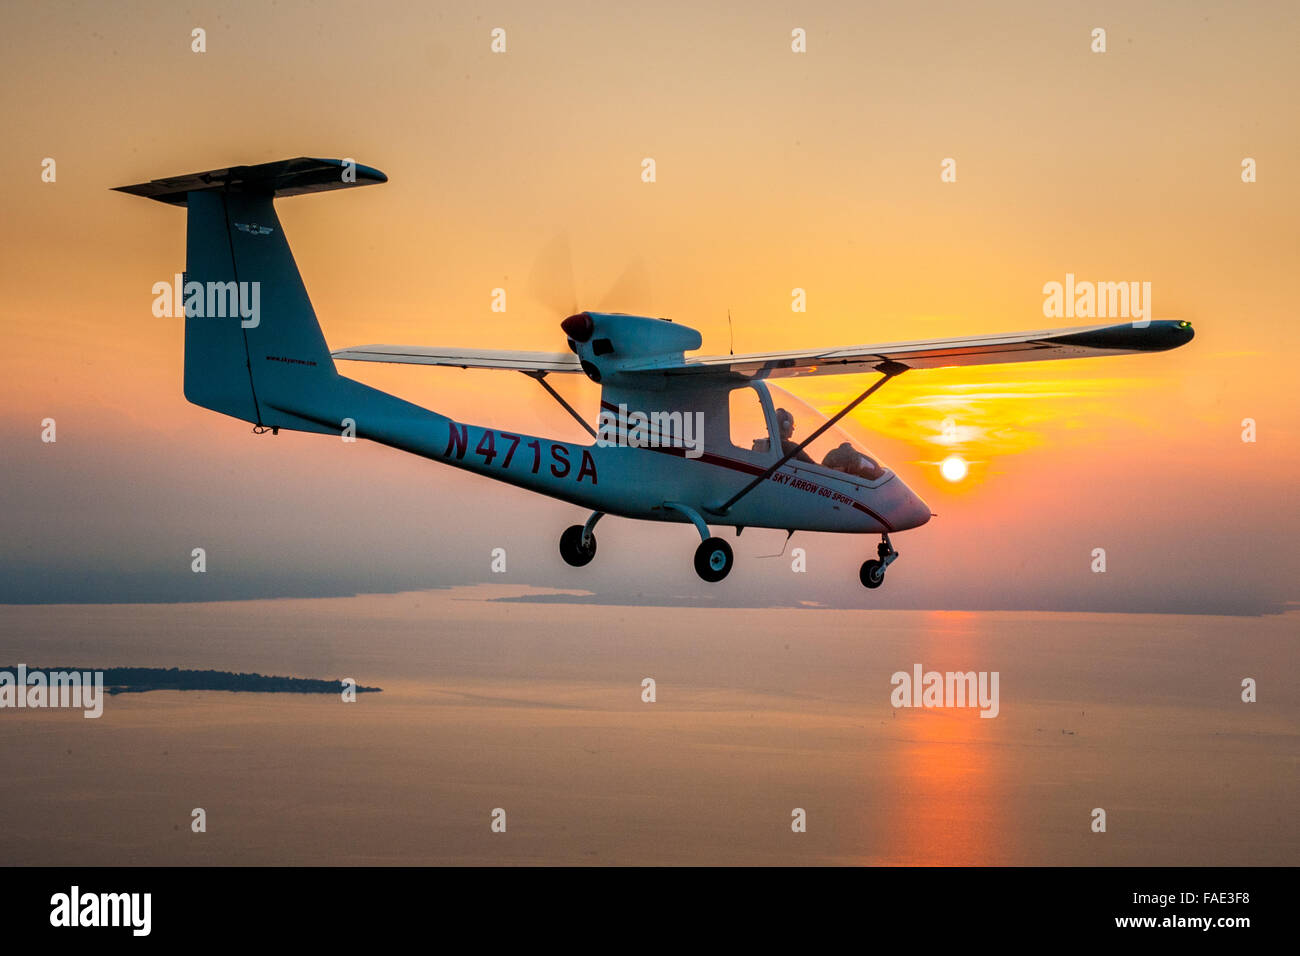 Plane flying at sunset in Maryland Stock Photo